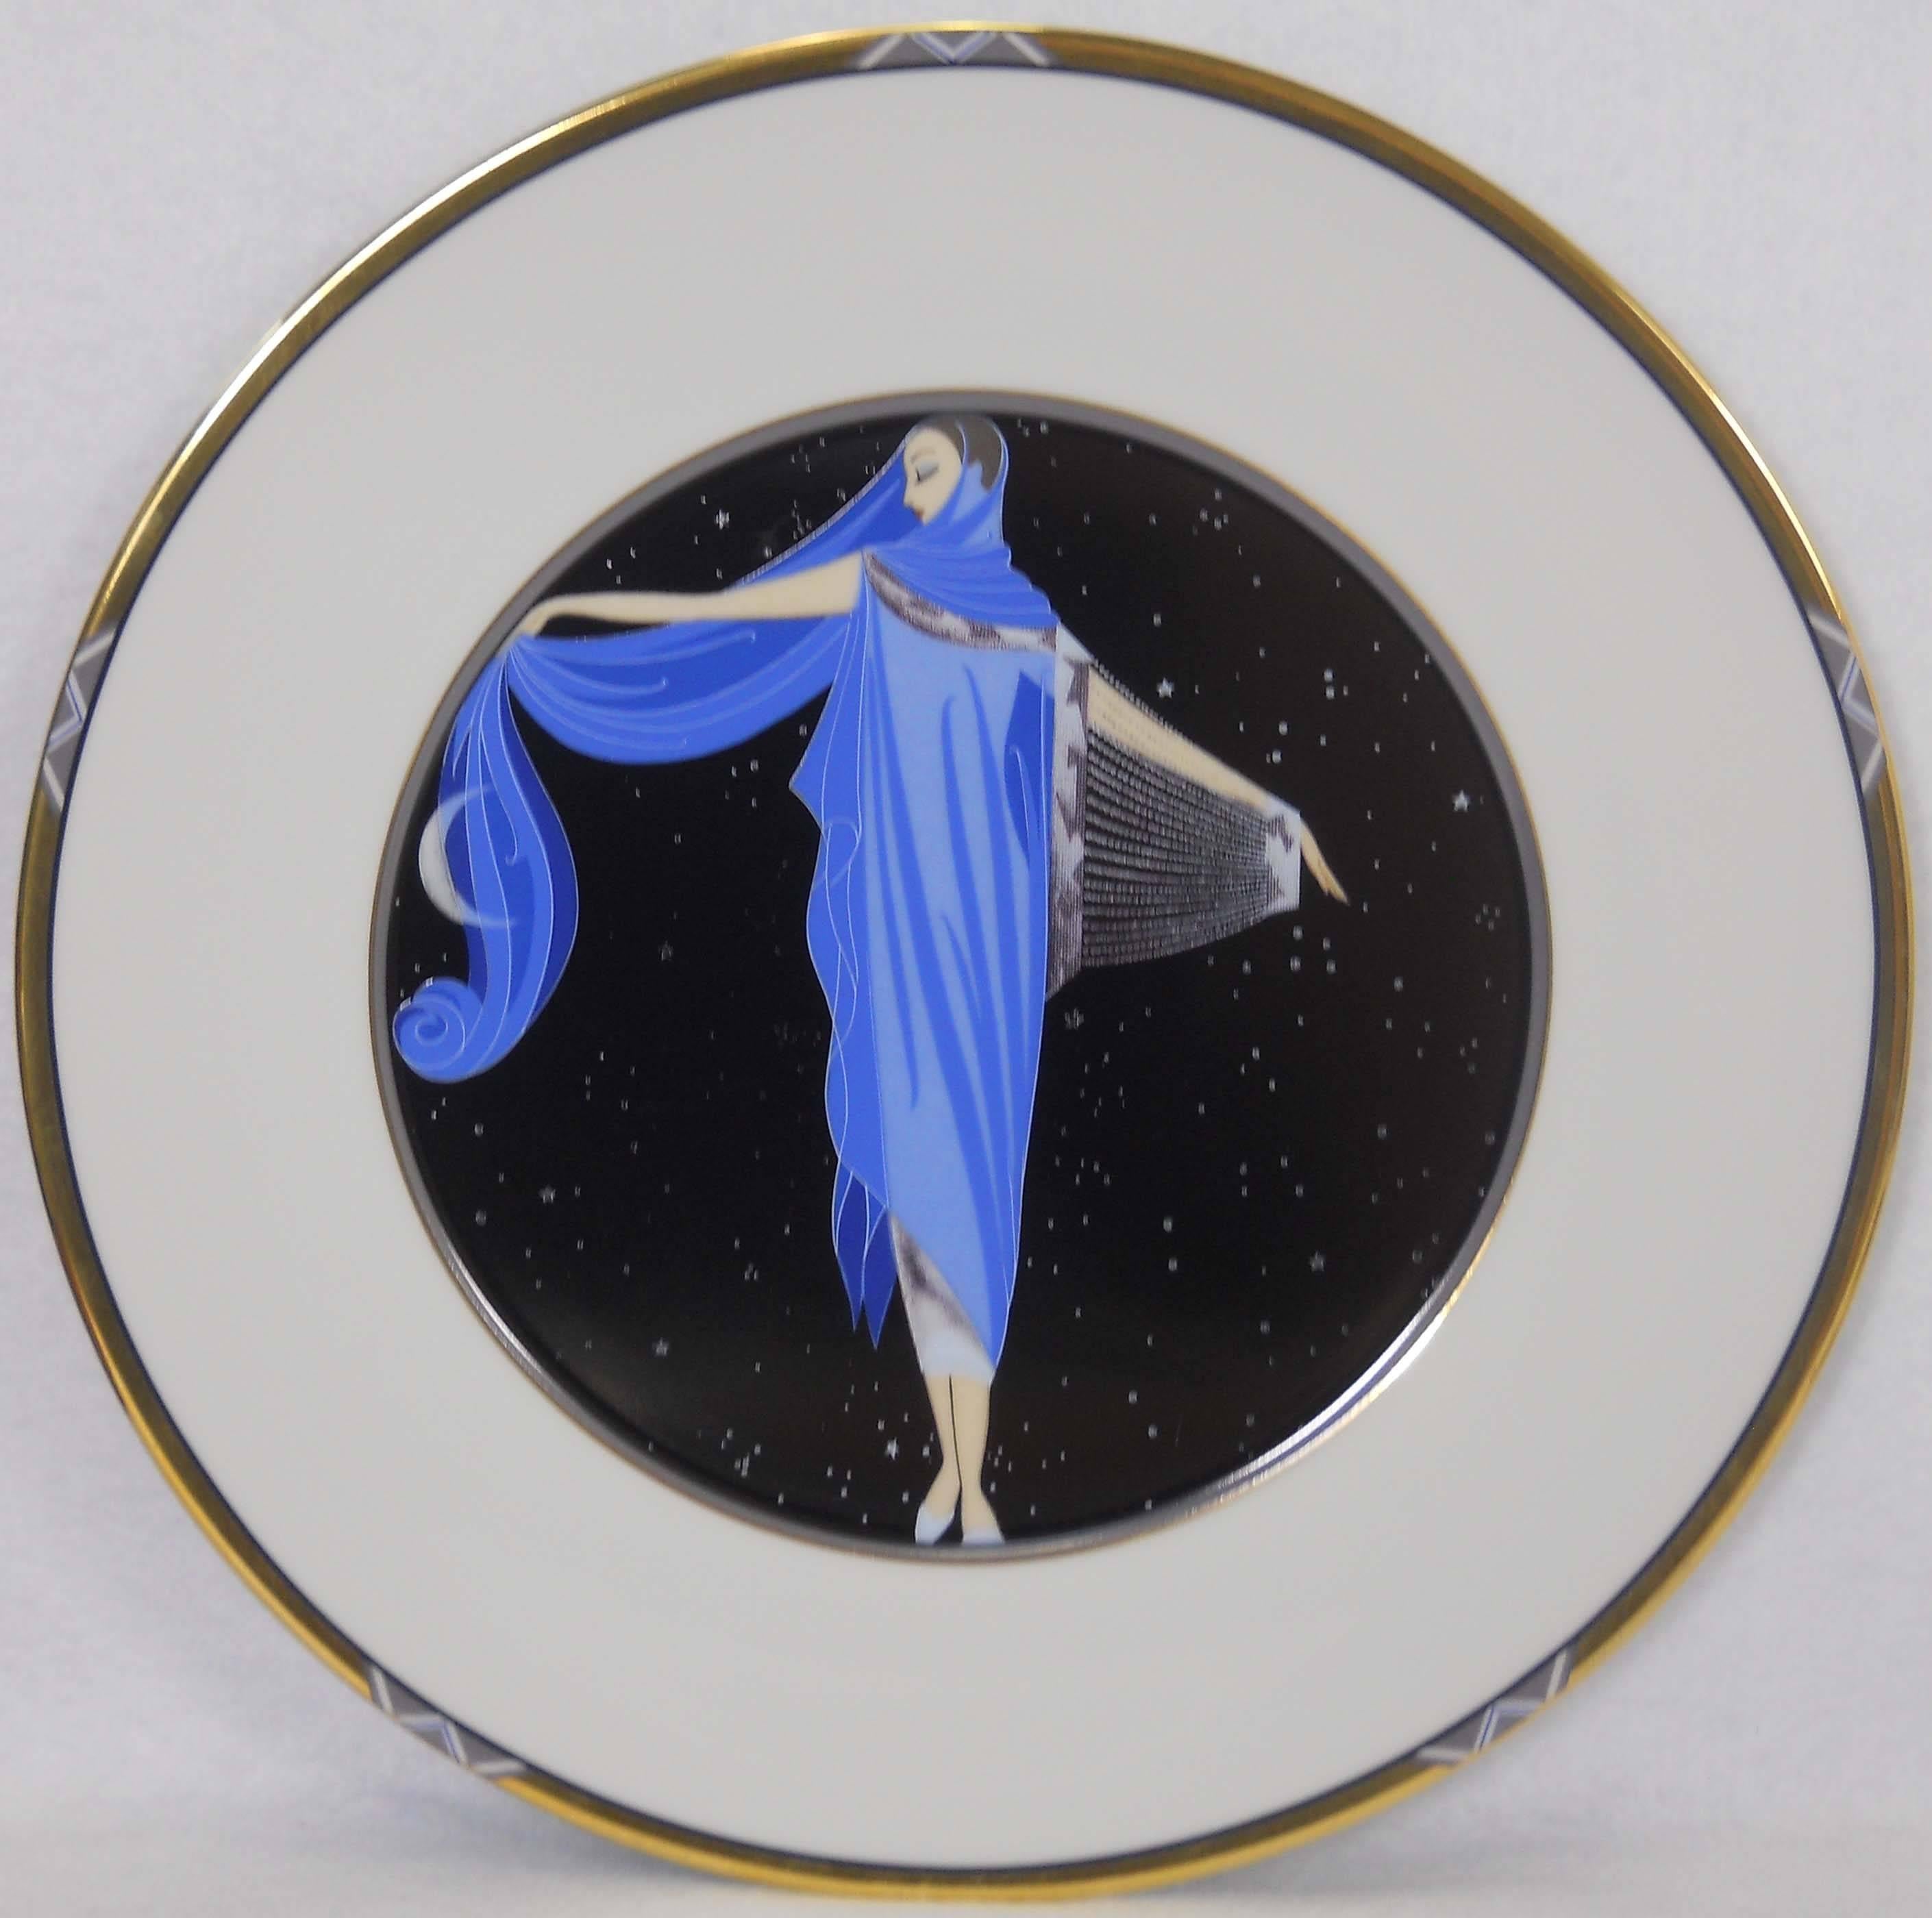  1988 Erte Moonlight Porcelain Plate or Charger UH200 by Mikasa 